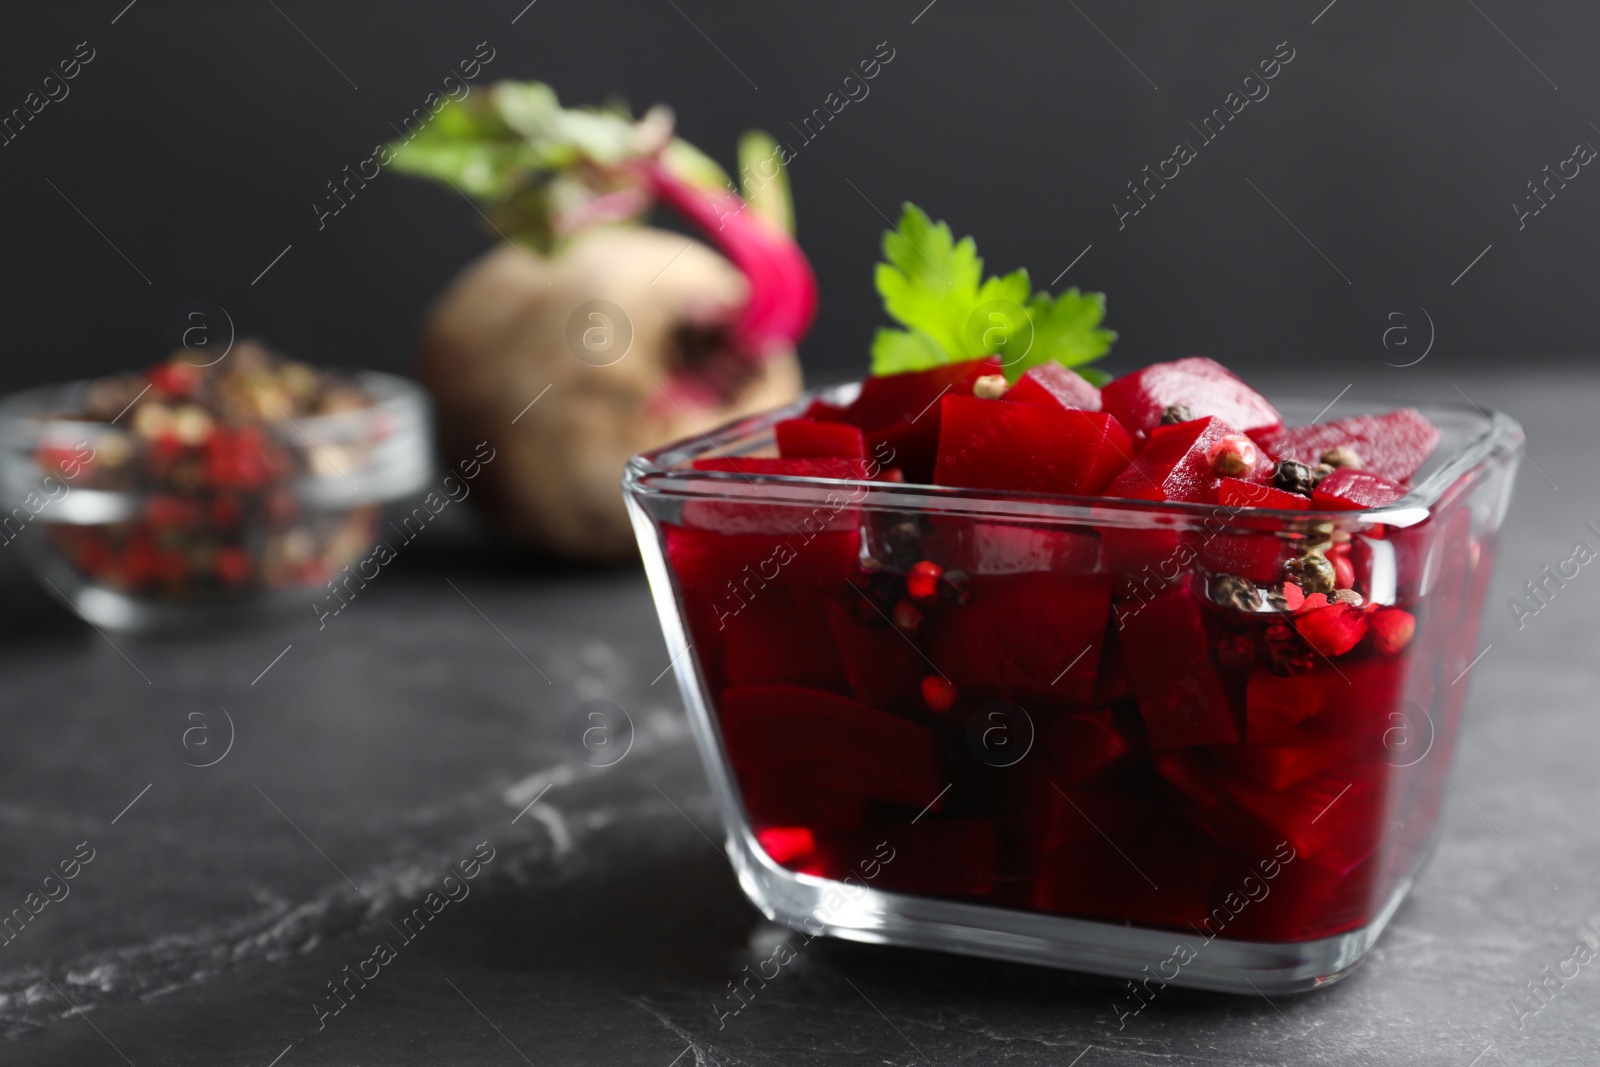 Photo of Pickled beets in glass bowl on dark marble table